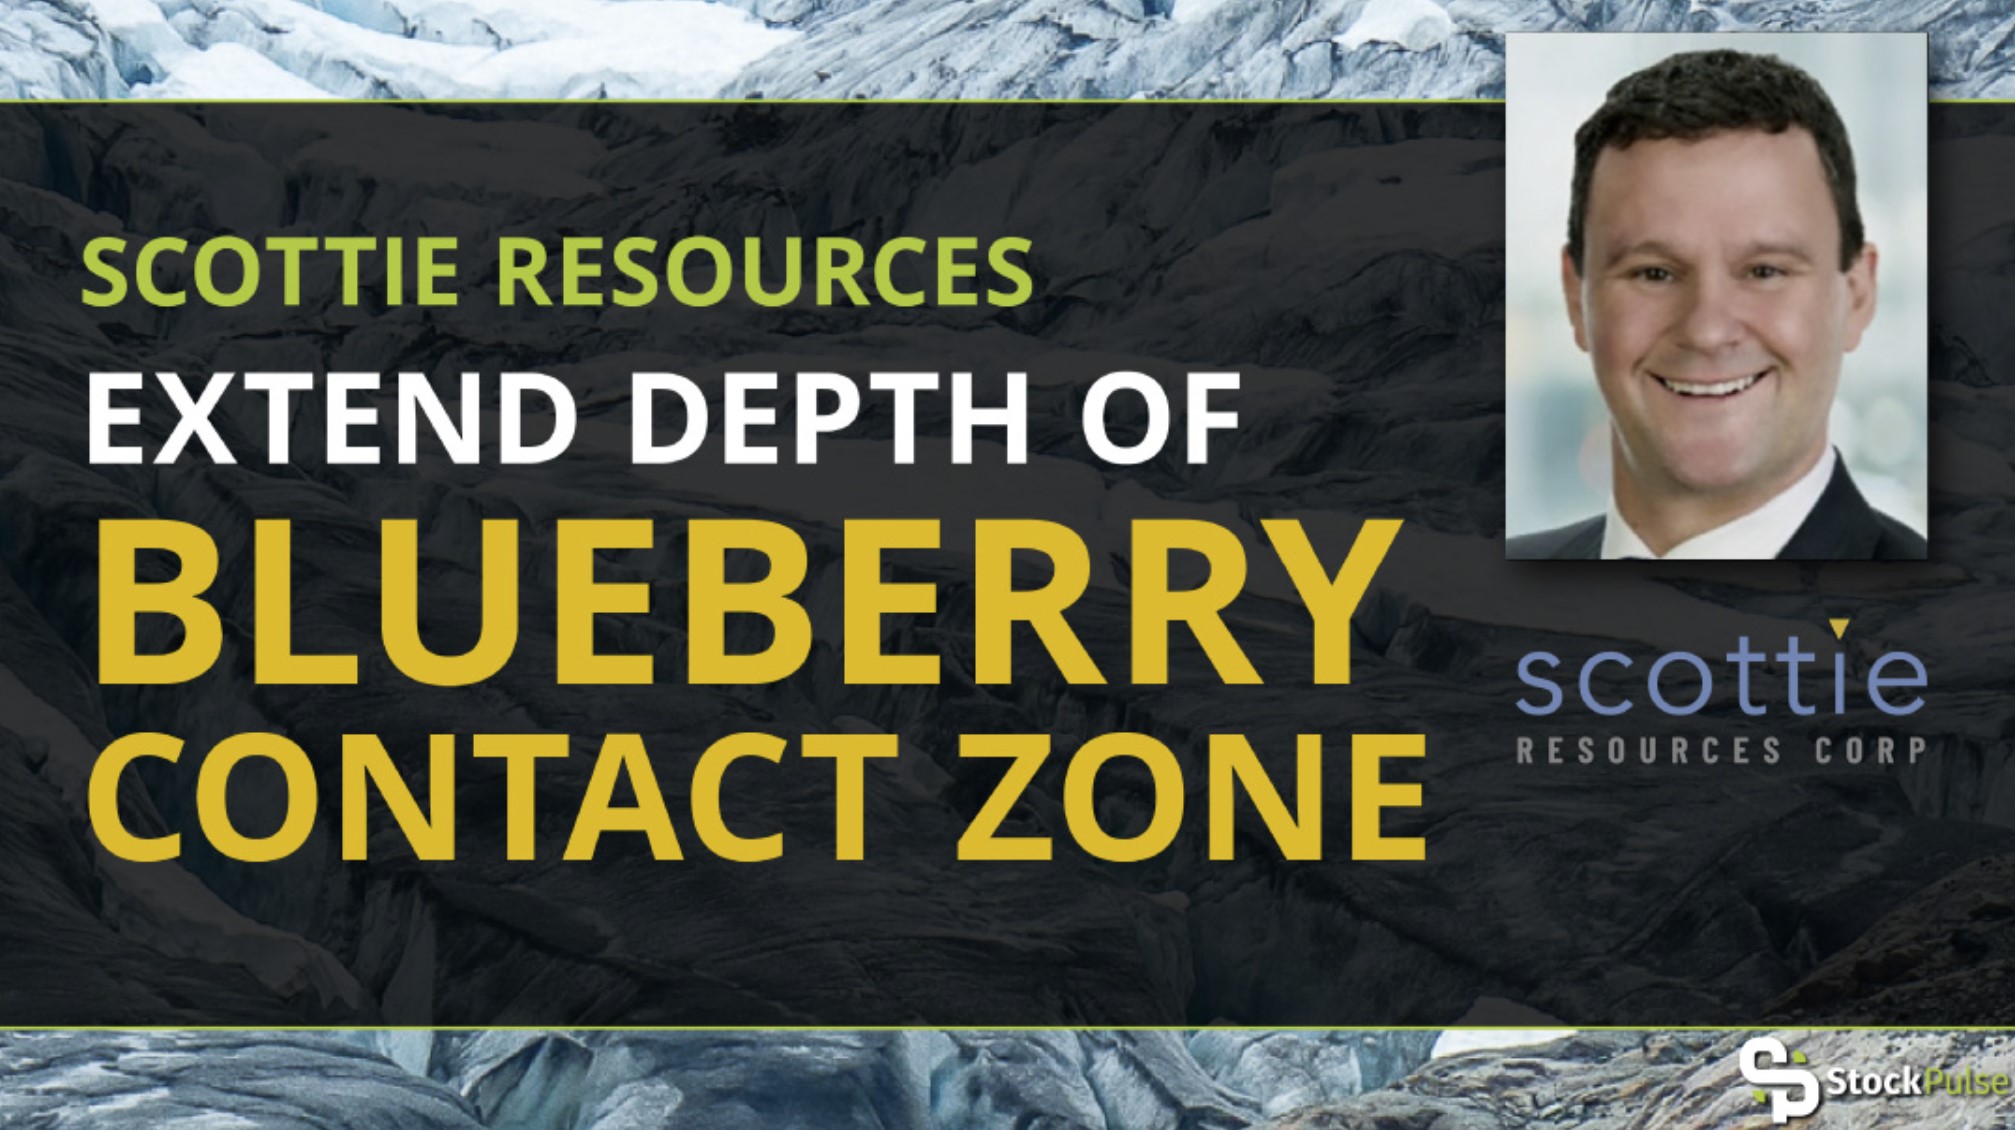 Scottie Resources Extends the Depth of the Blueberry Zone